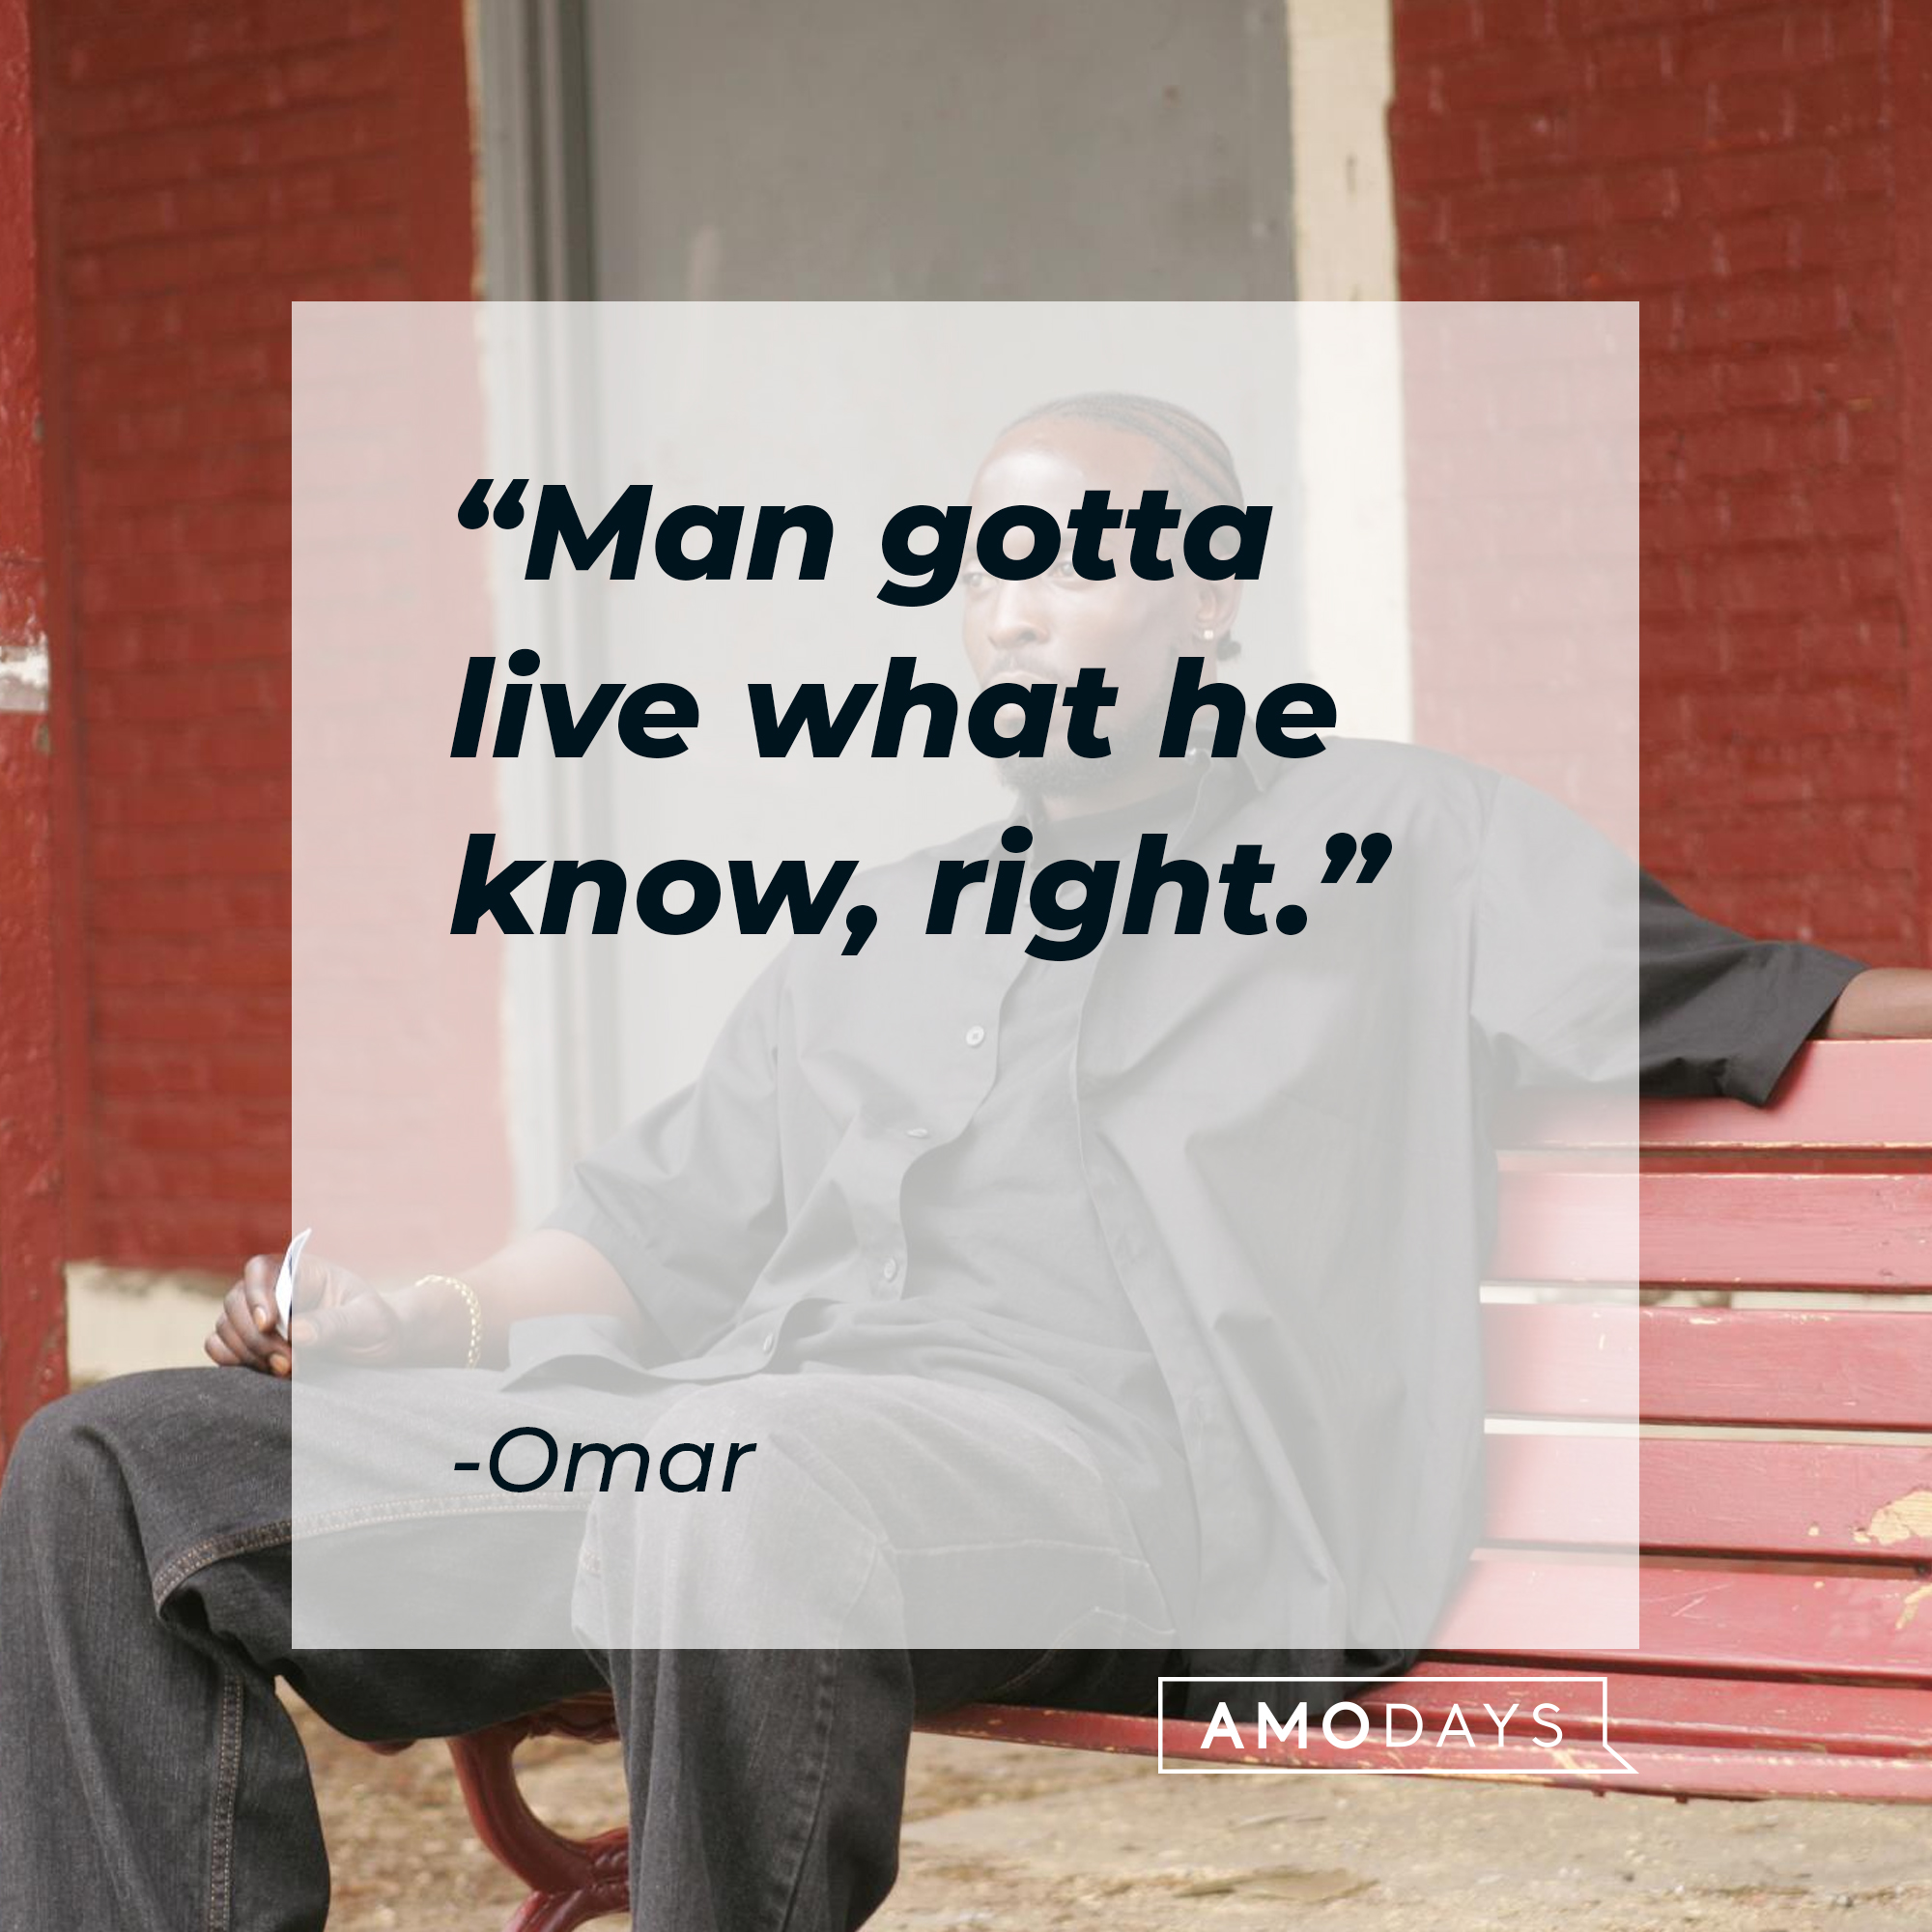 Omar's quote: "Man gotta live what he know, right." | Source: facebook.com/TheWire